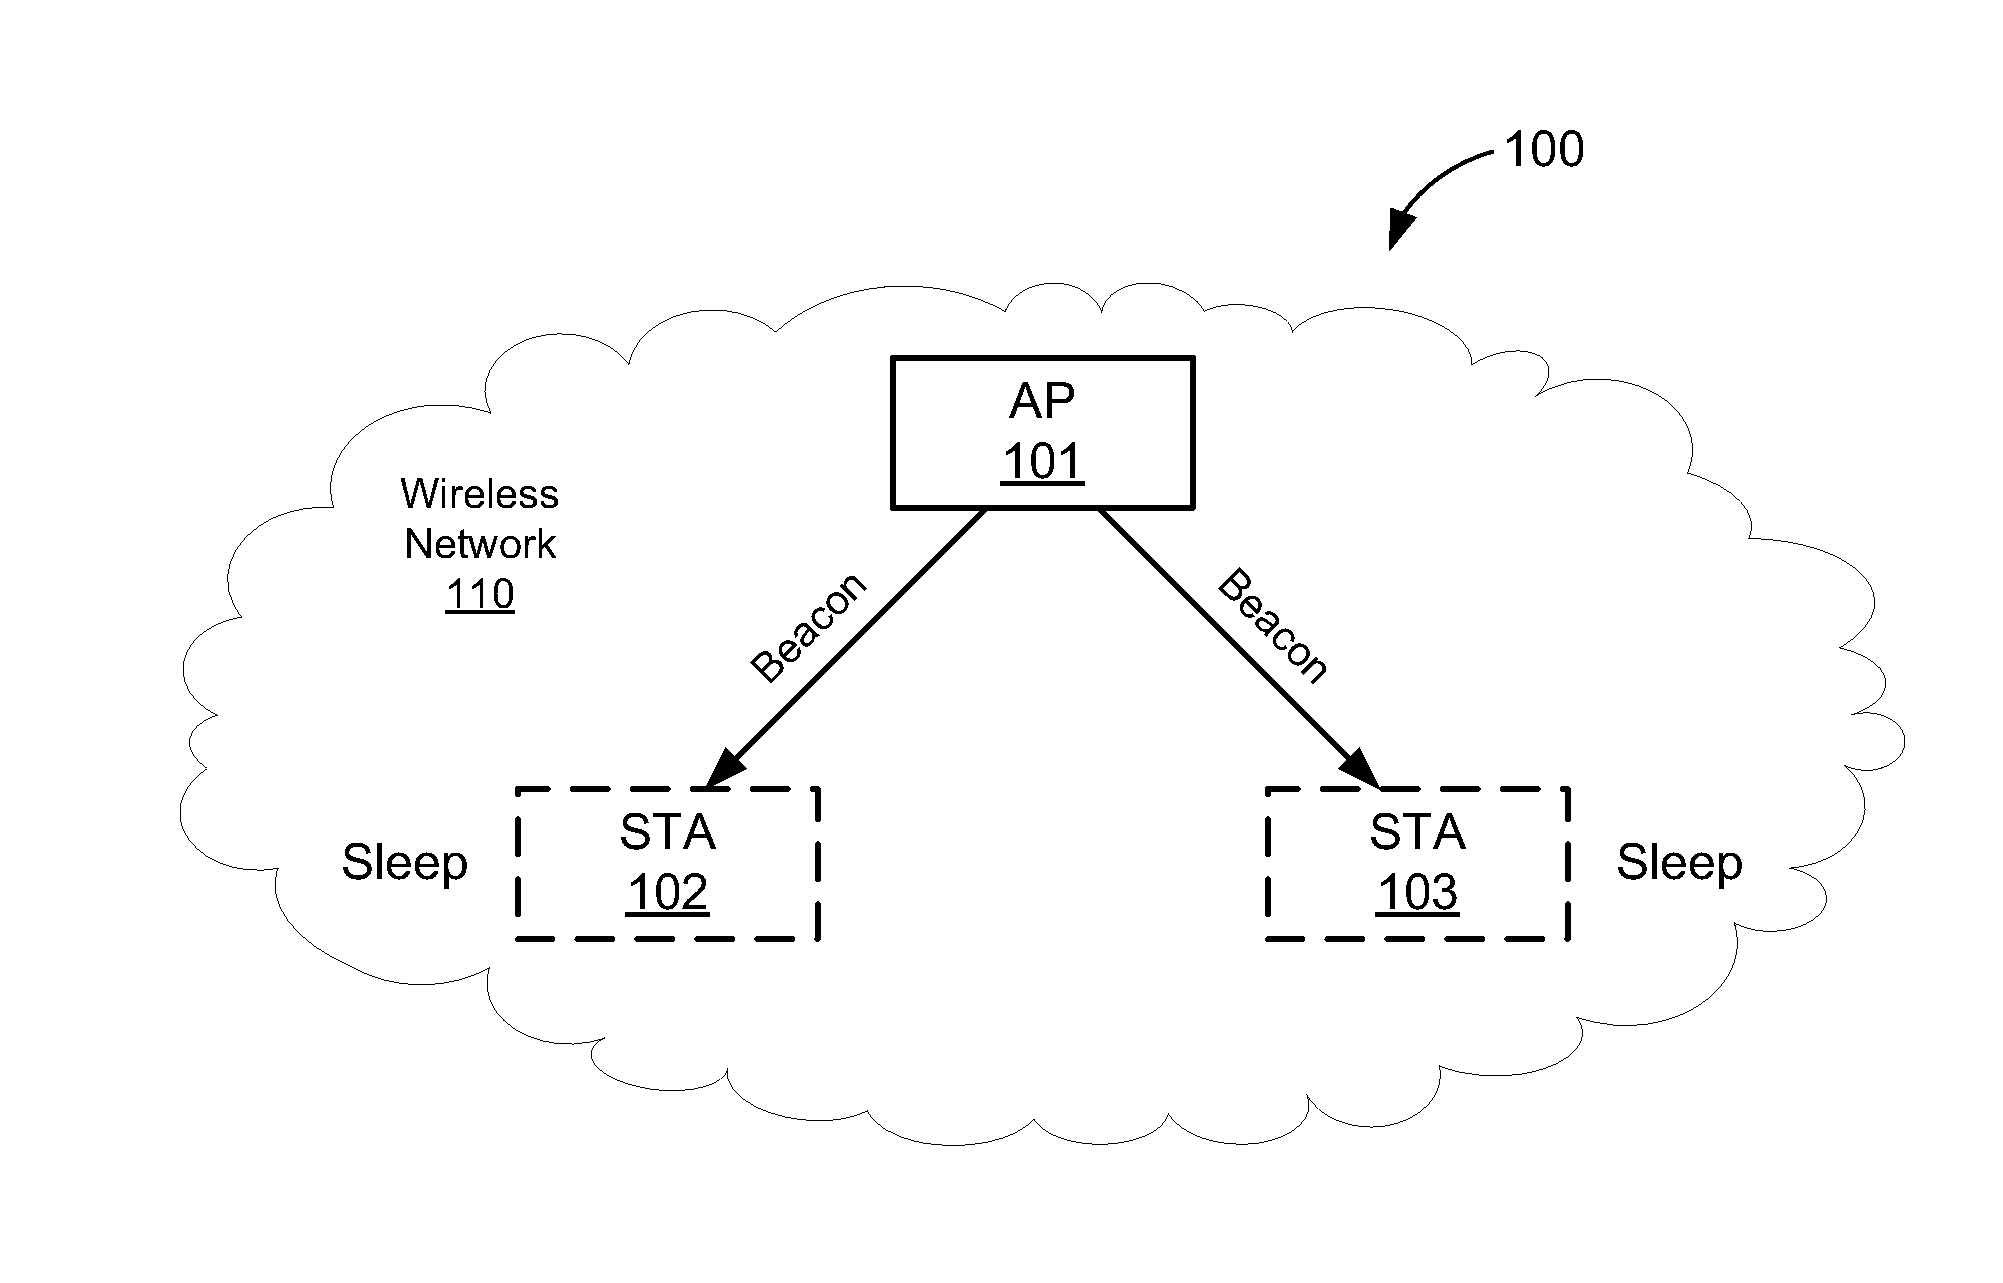 Link verification in a wireless network